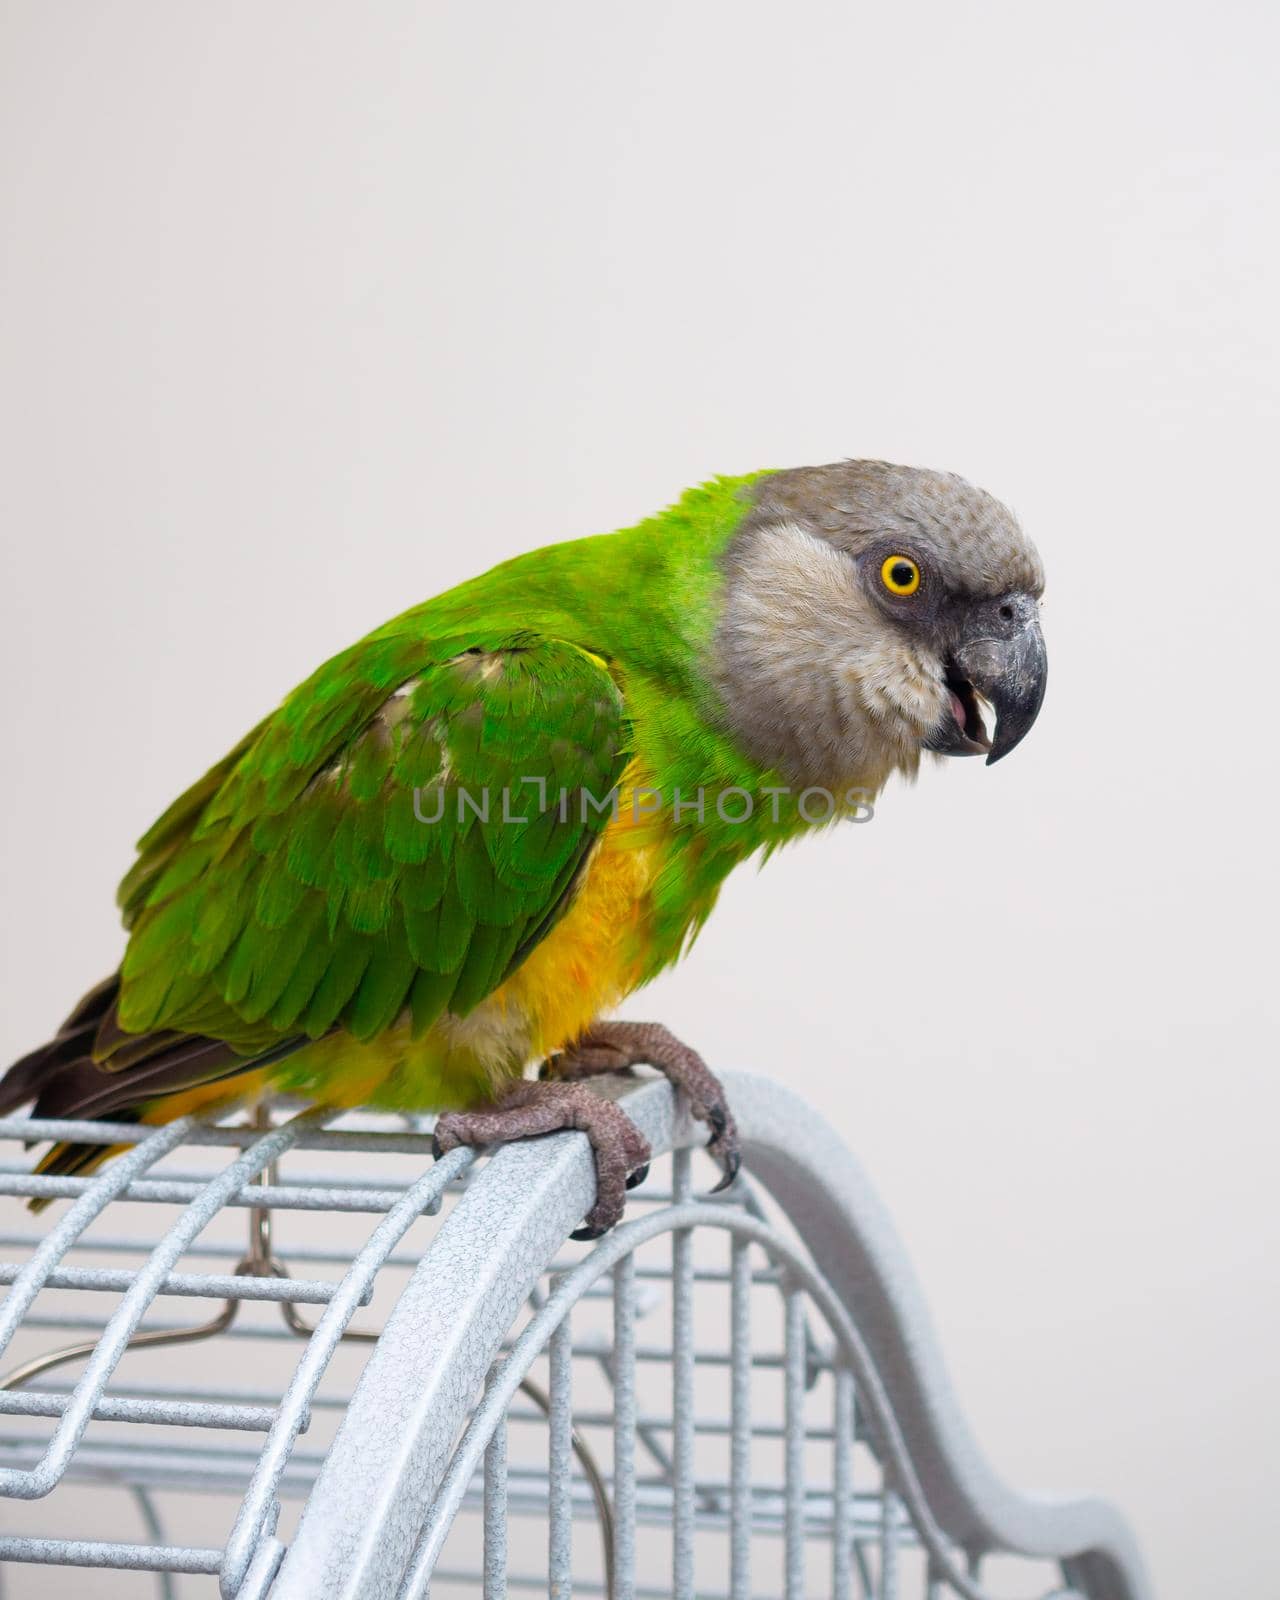 Poicephalus Senegal. Senegalese parrot sits on a cage. by Andre1ns